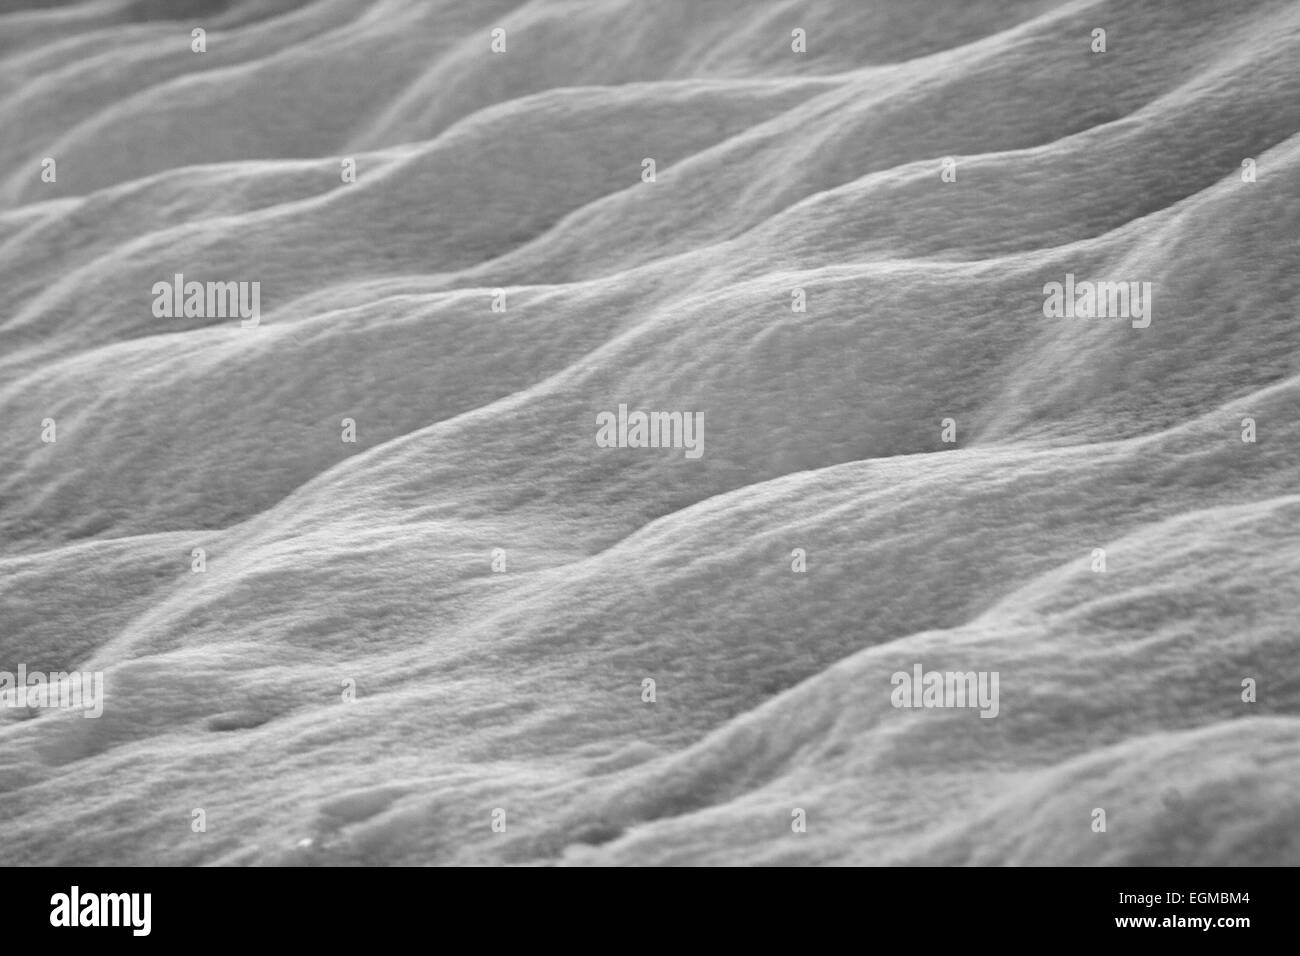 Silver Waves Background Texture Stock Photo